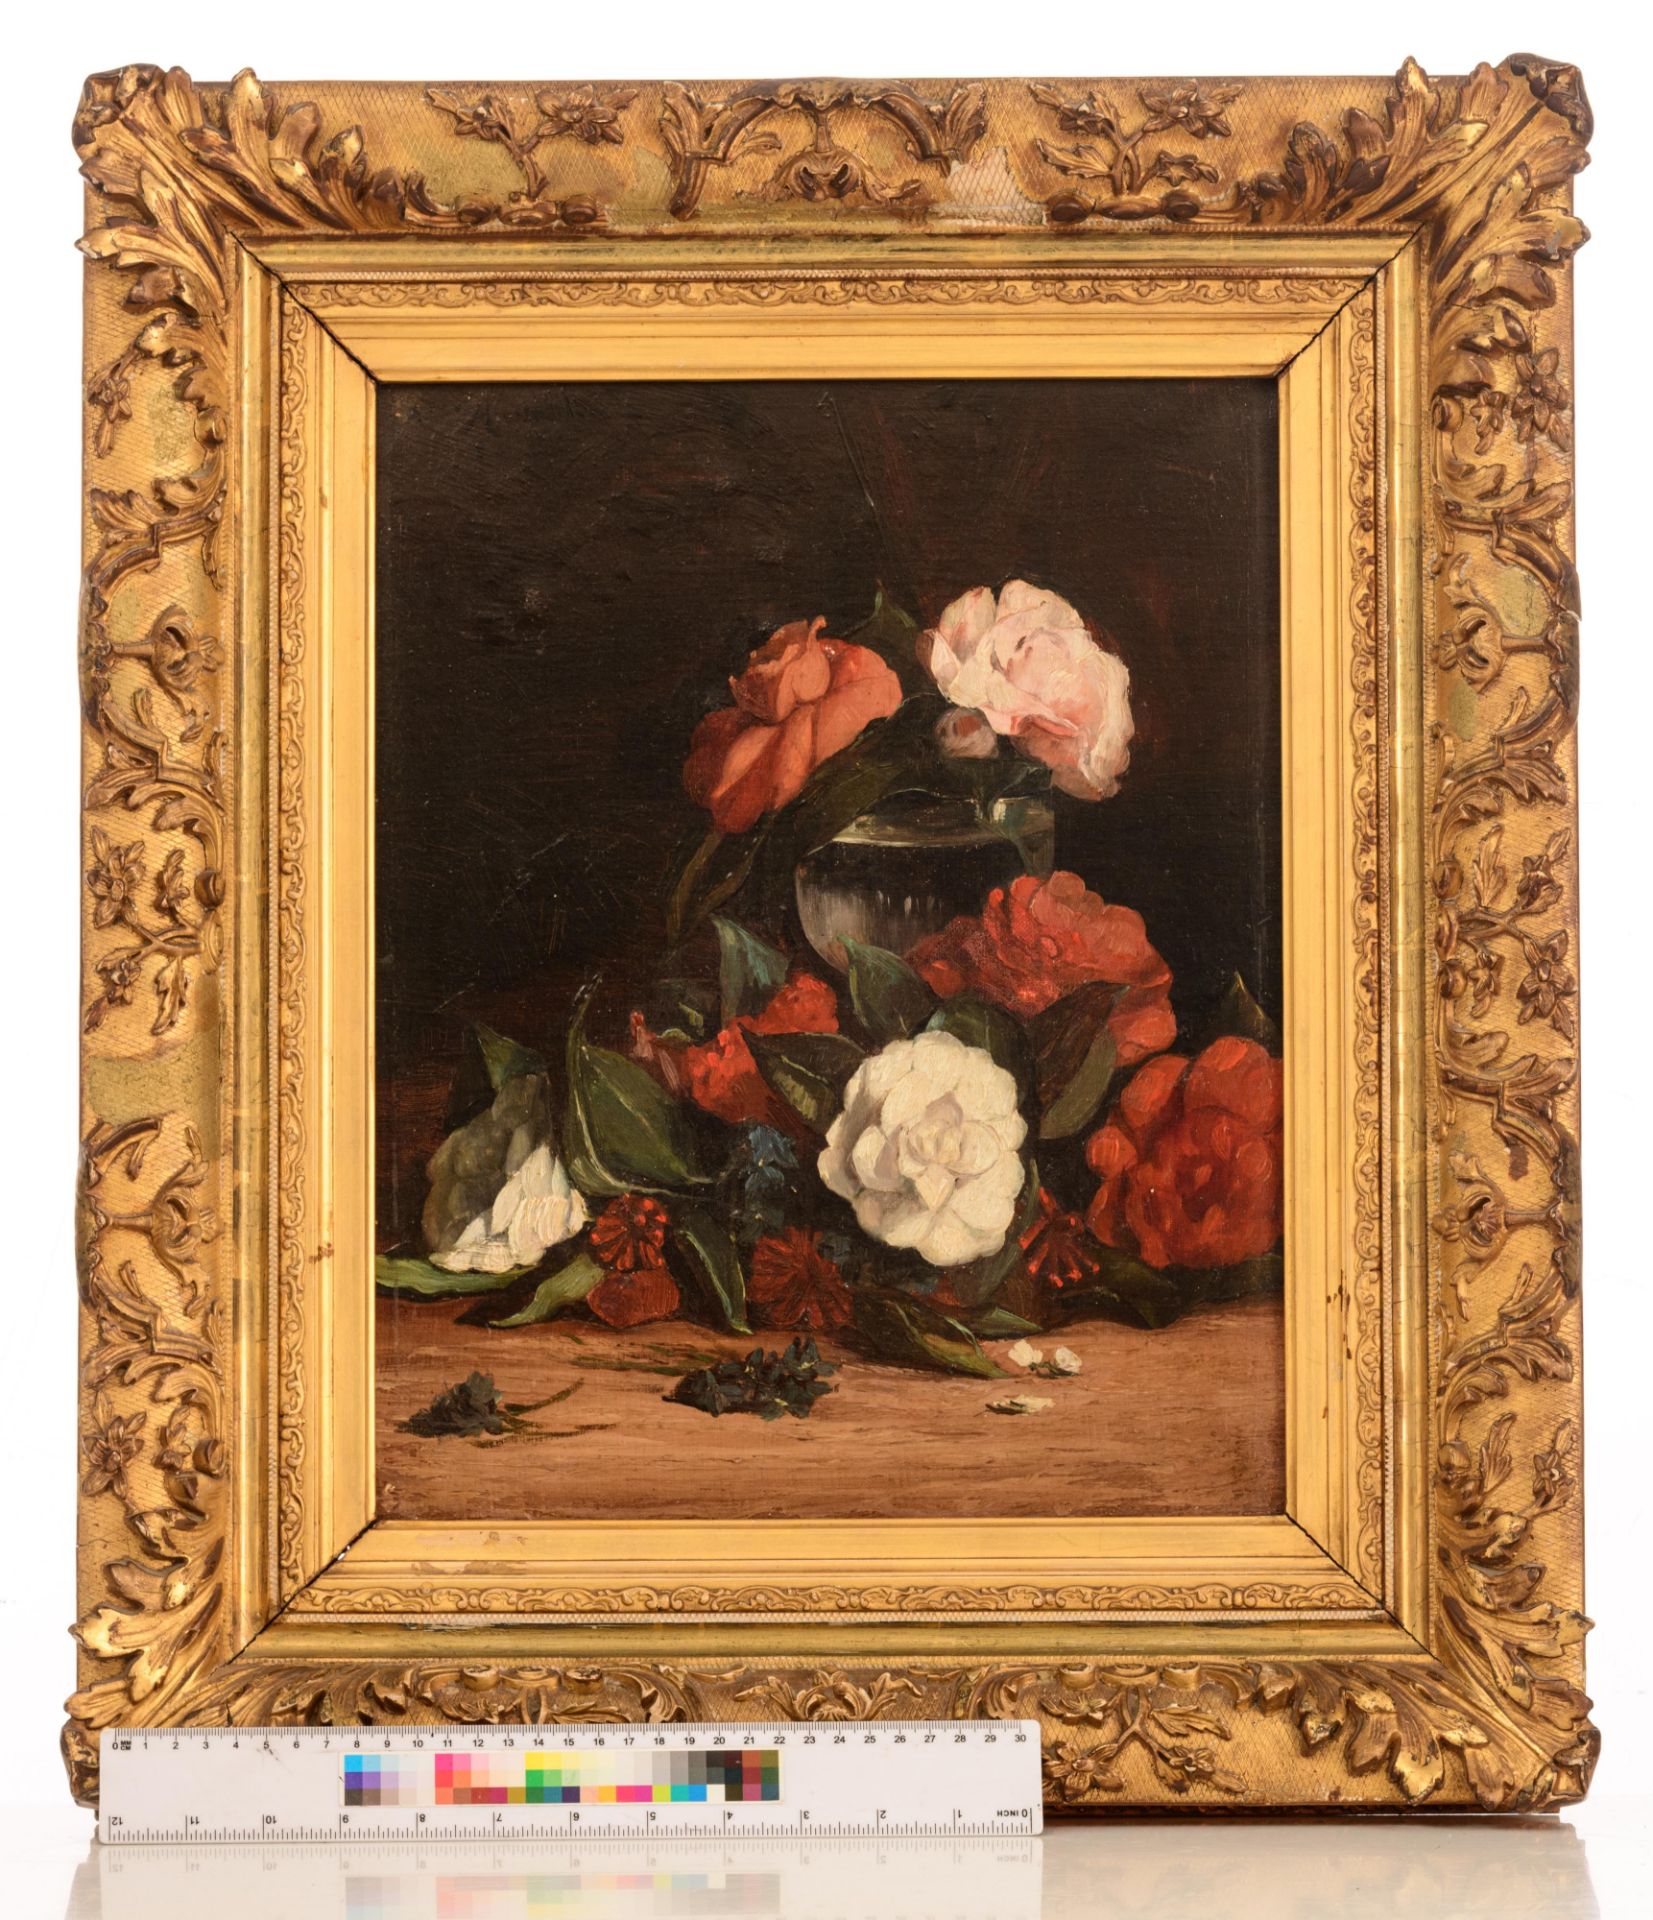 Indistinctly signed, a flower still life, 1884, 33 x 40 cm - Image 8 of 8